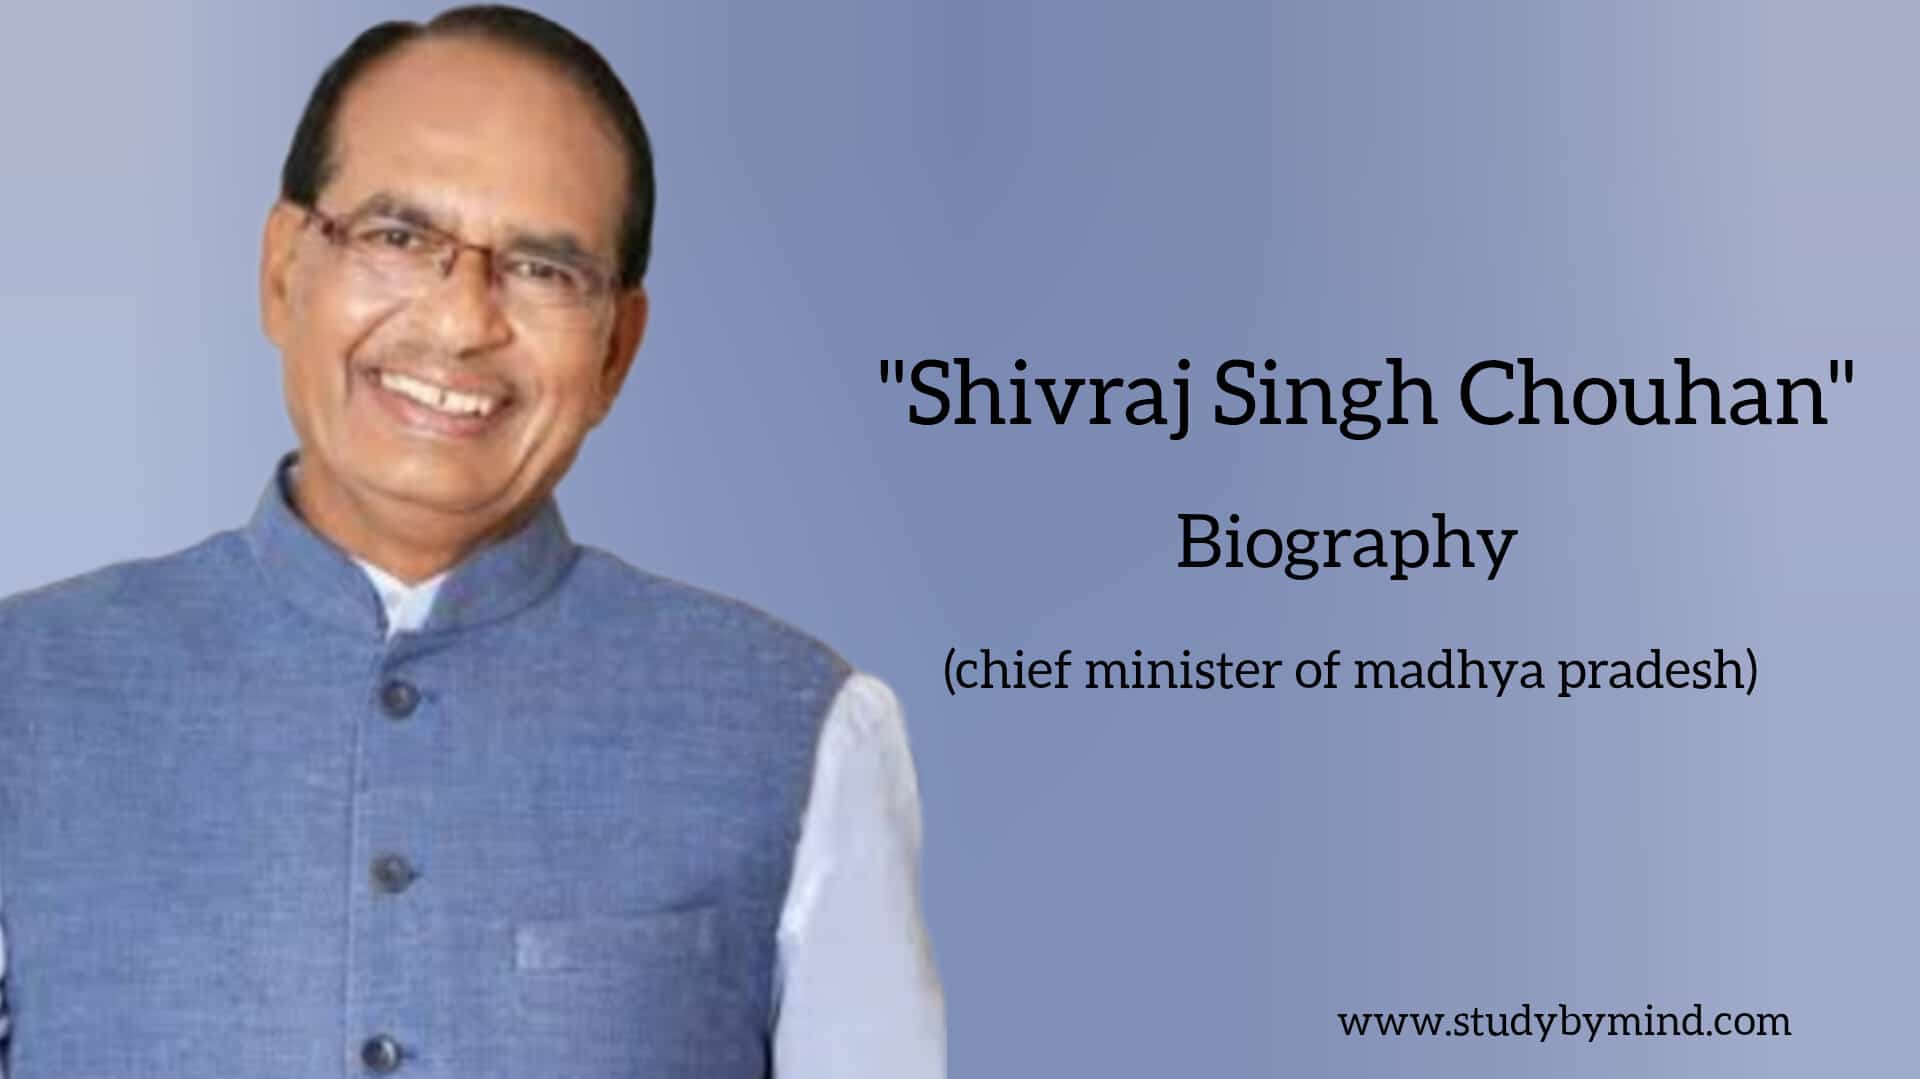 You are currently viewing Shivraj Singh Chouhan Biography in english (Chief Minister of Madhya Pradesh)